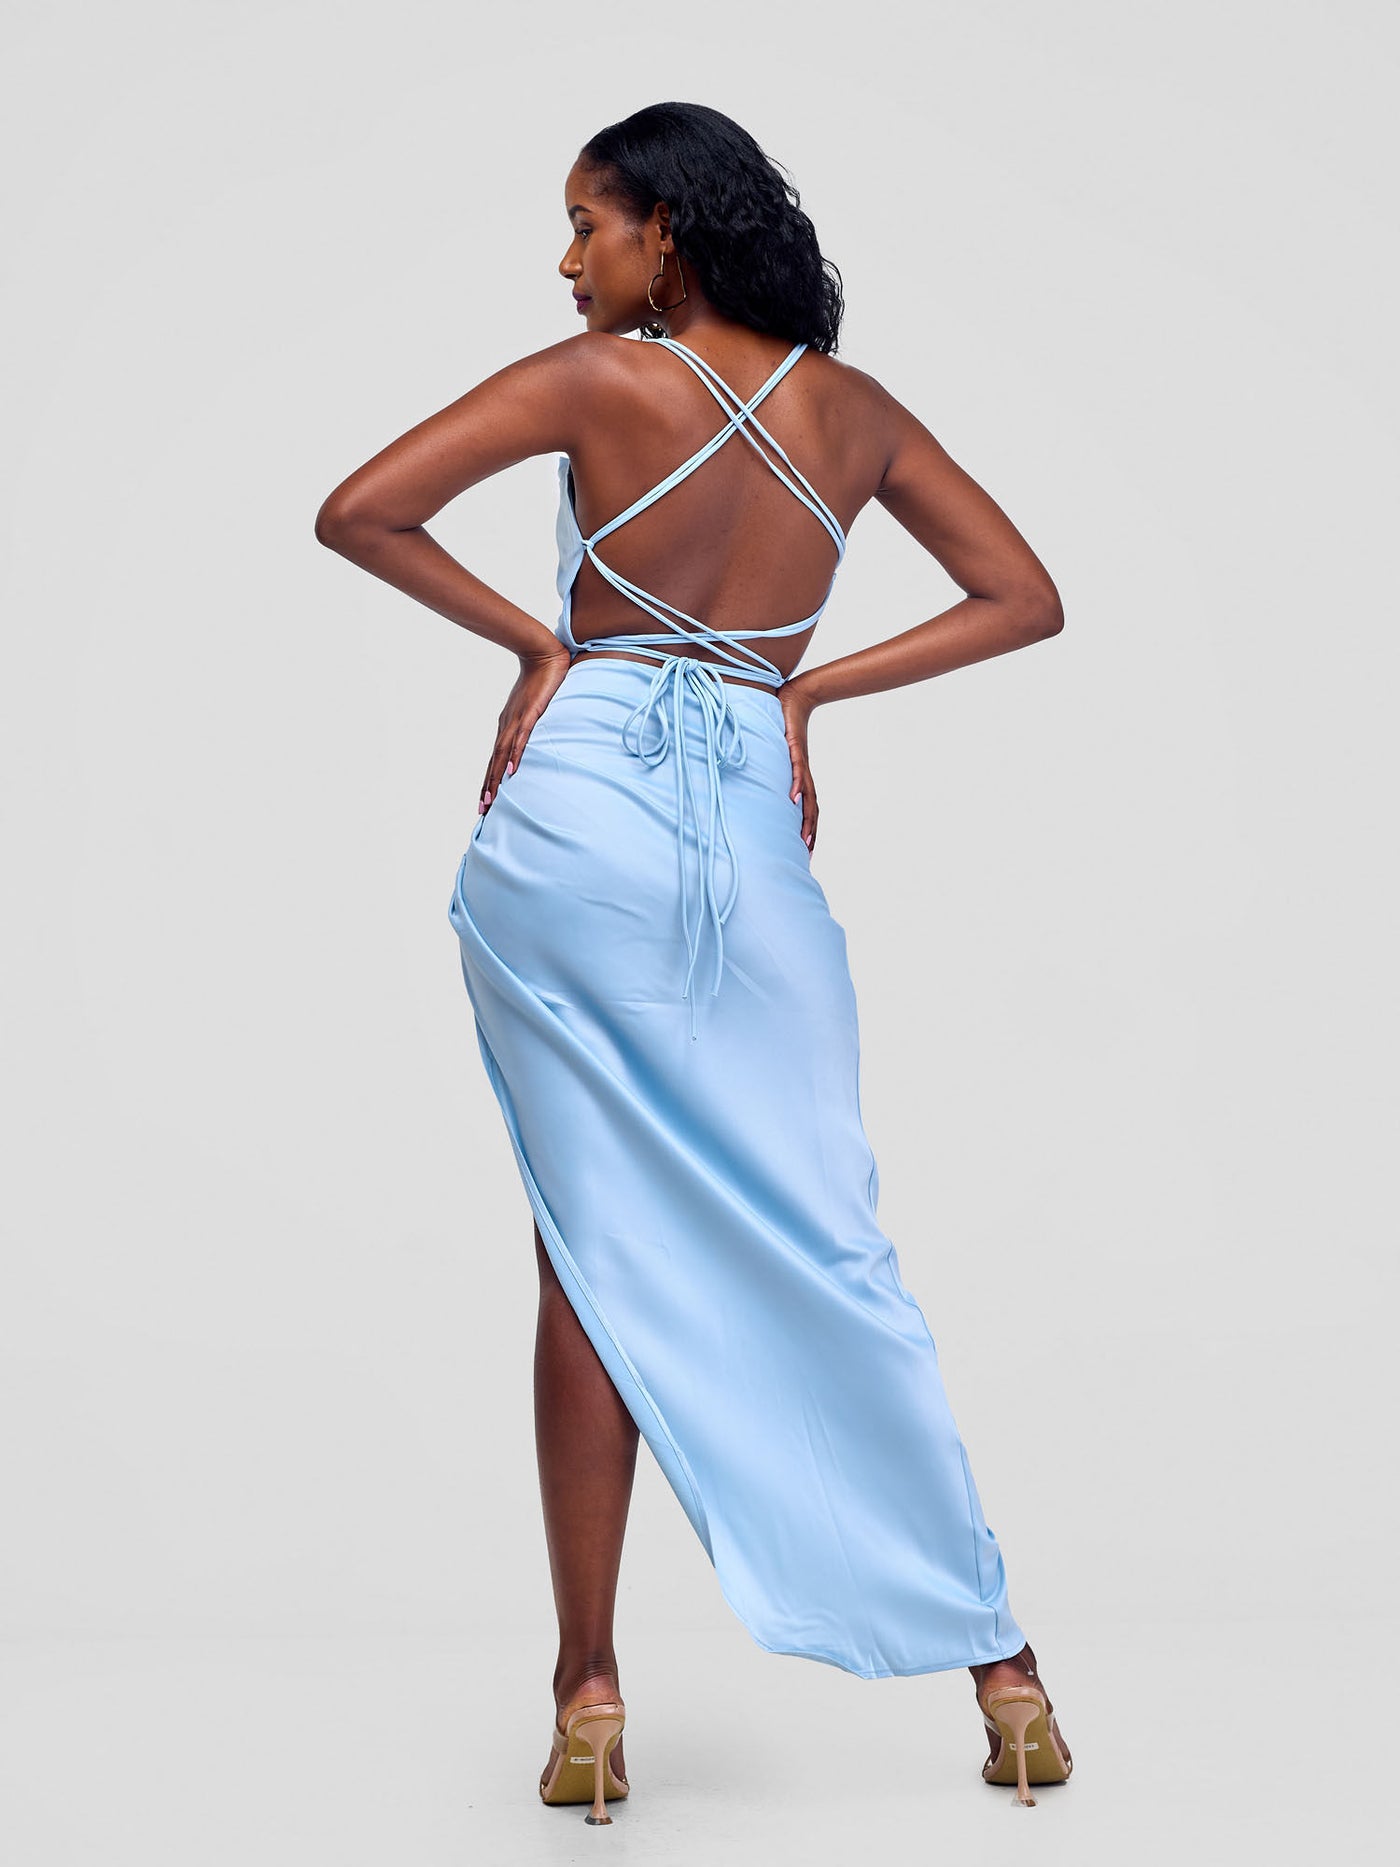 Lola Backless Strappy Satin Dress  With High Side Slit - Baby Blue